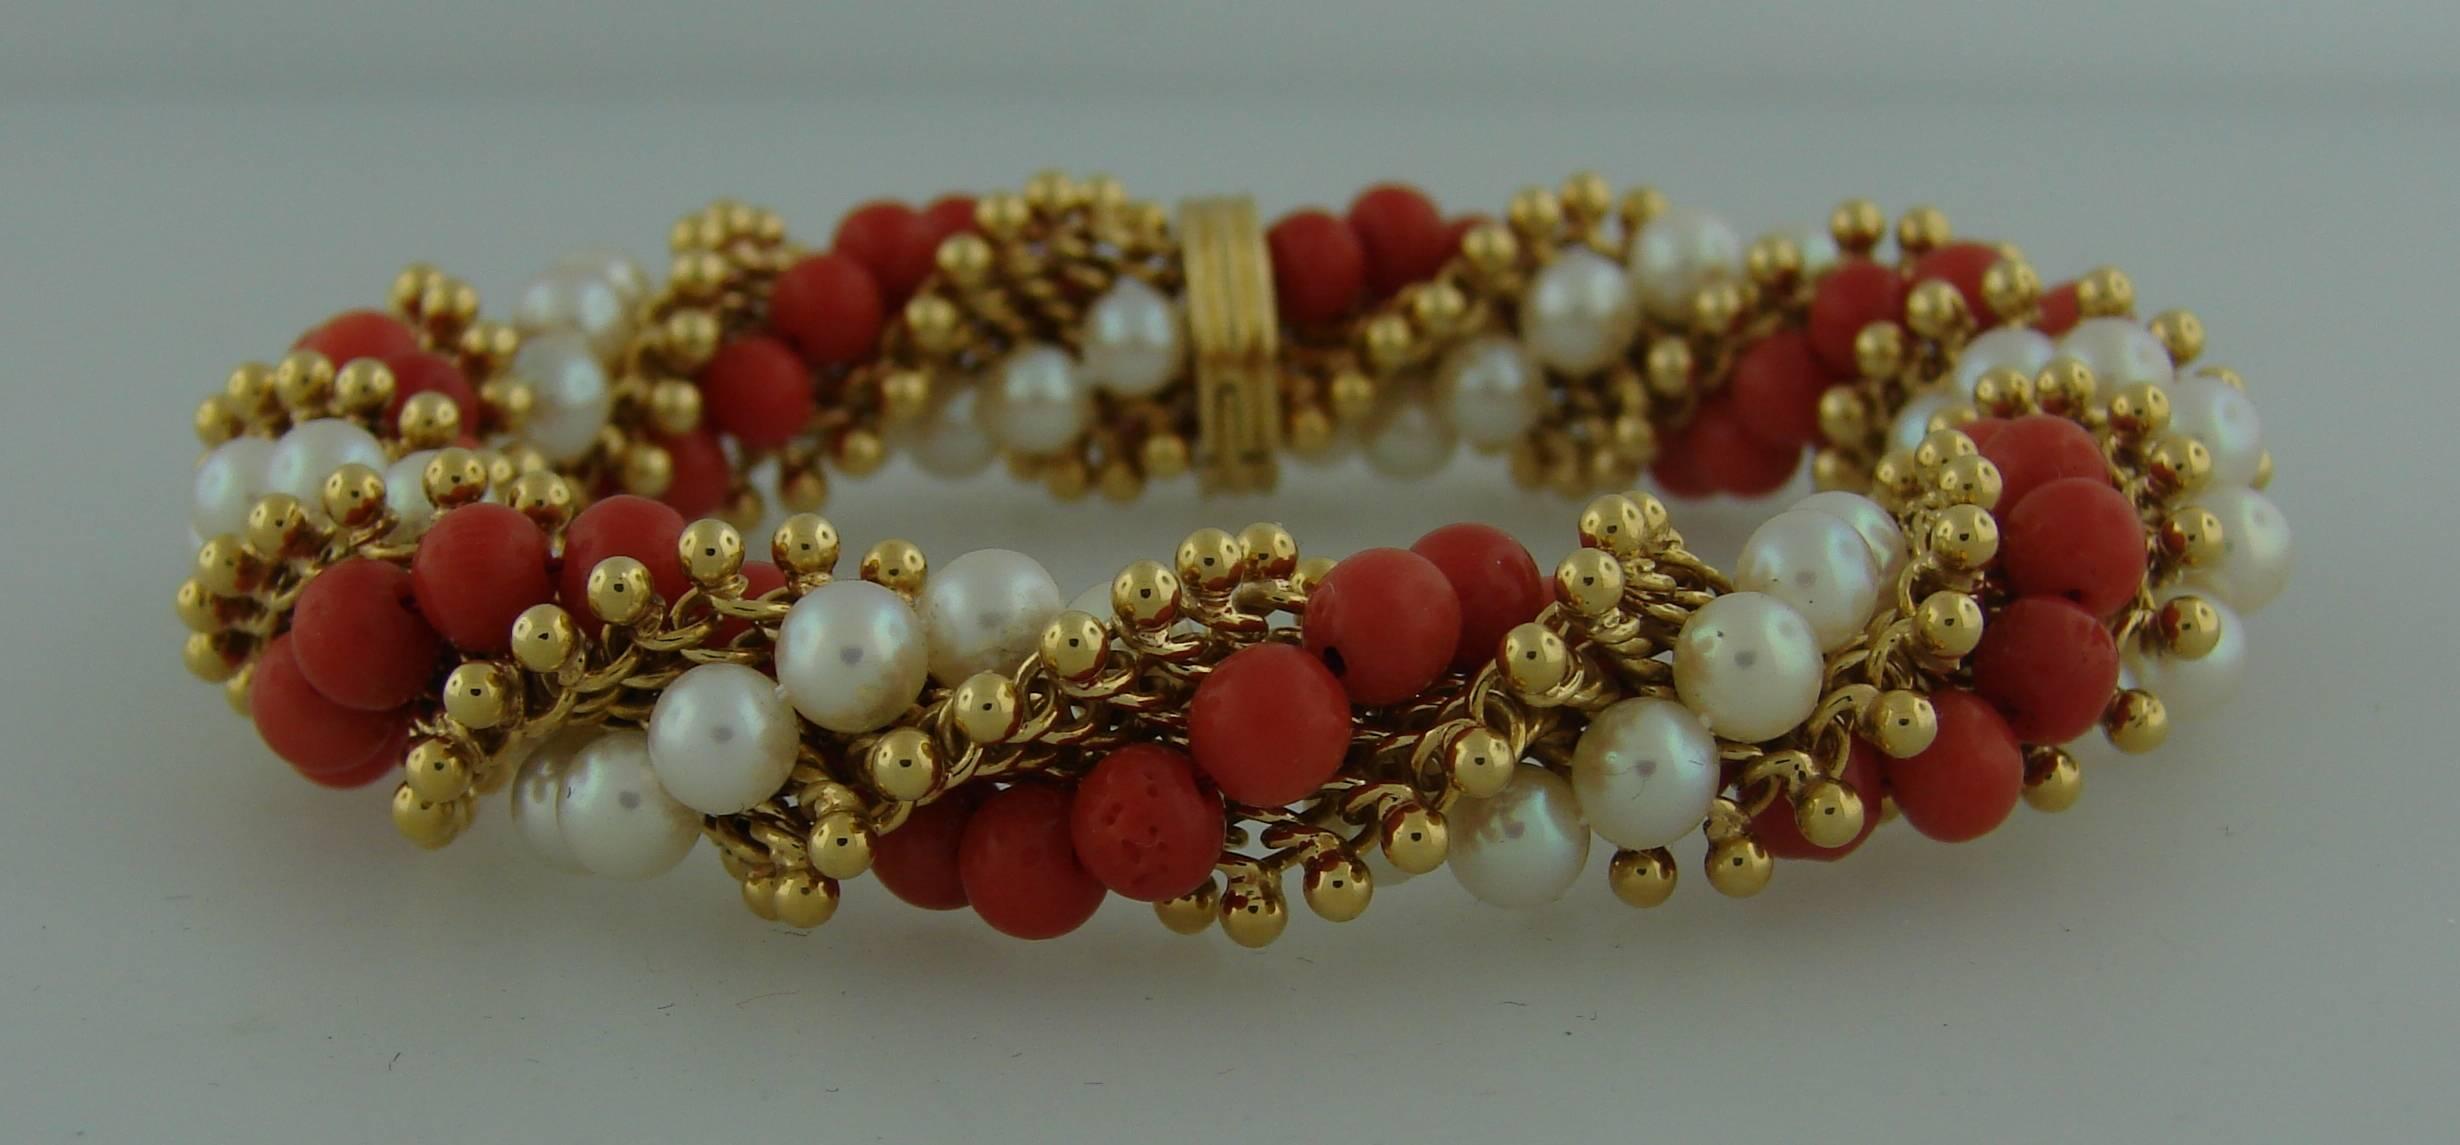 Chic and colorful bracelet created by Van Cleef & Arpels in France in the 1970s. Features a strand of pearls and a strand of coral beads embedded in 18k yellow gold mesh. 
The bracelet is 1/2